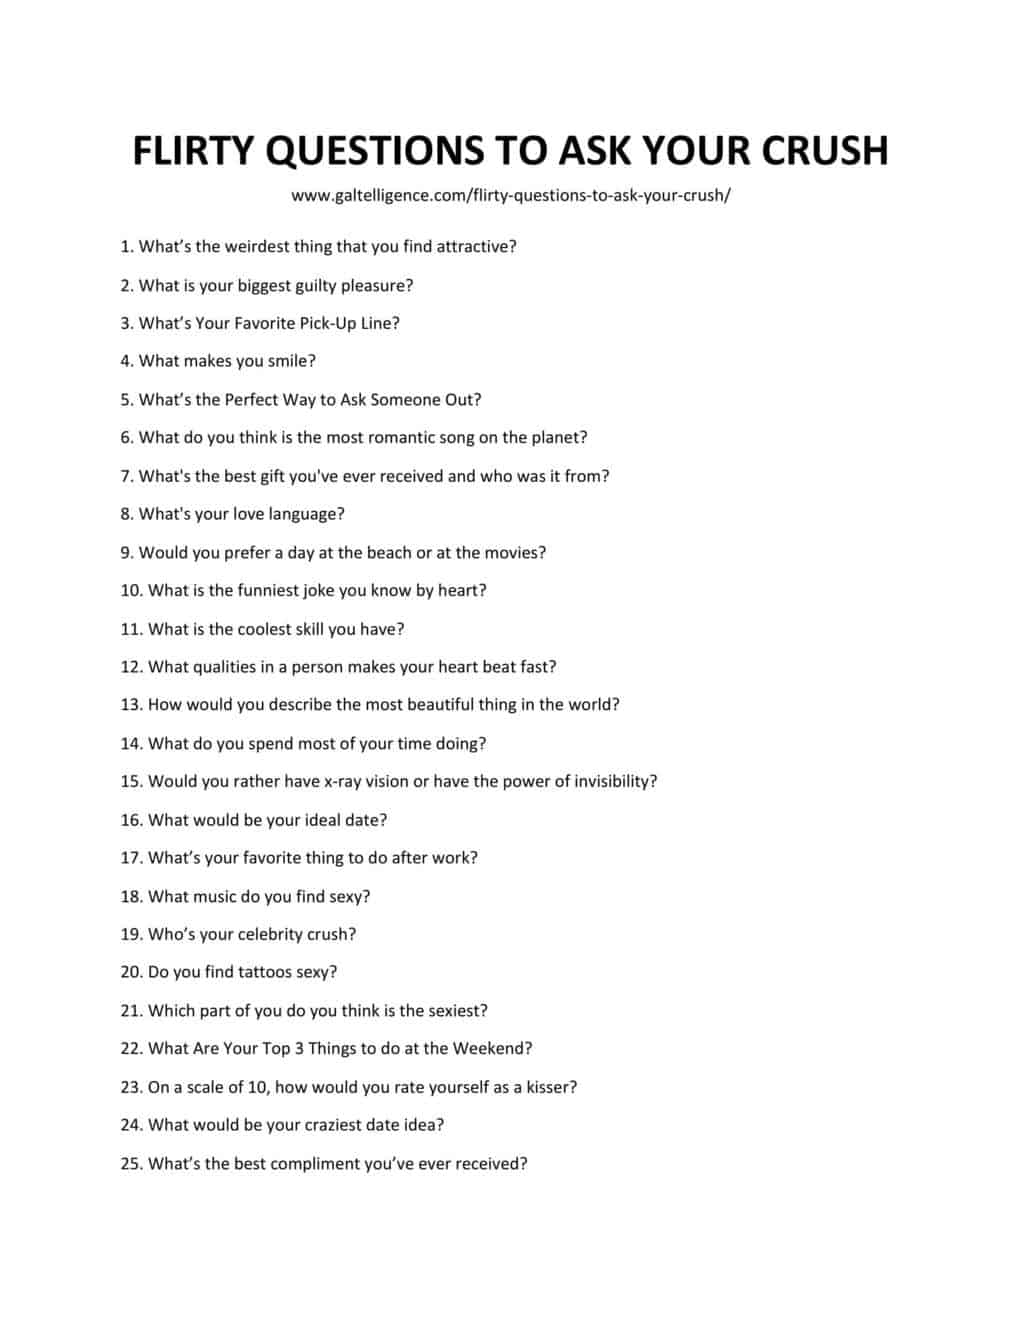 Downloadable list of flirty questions